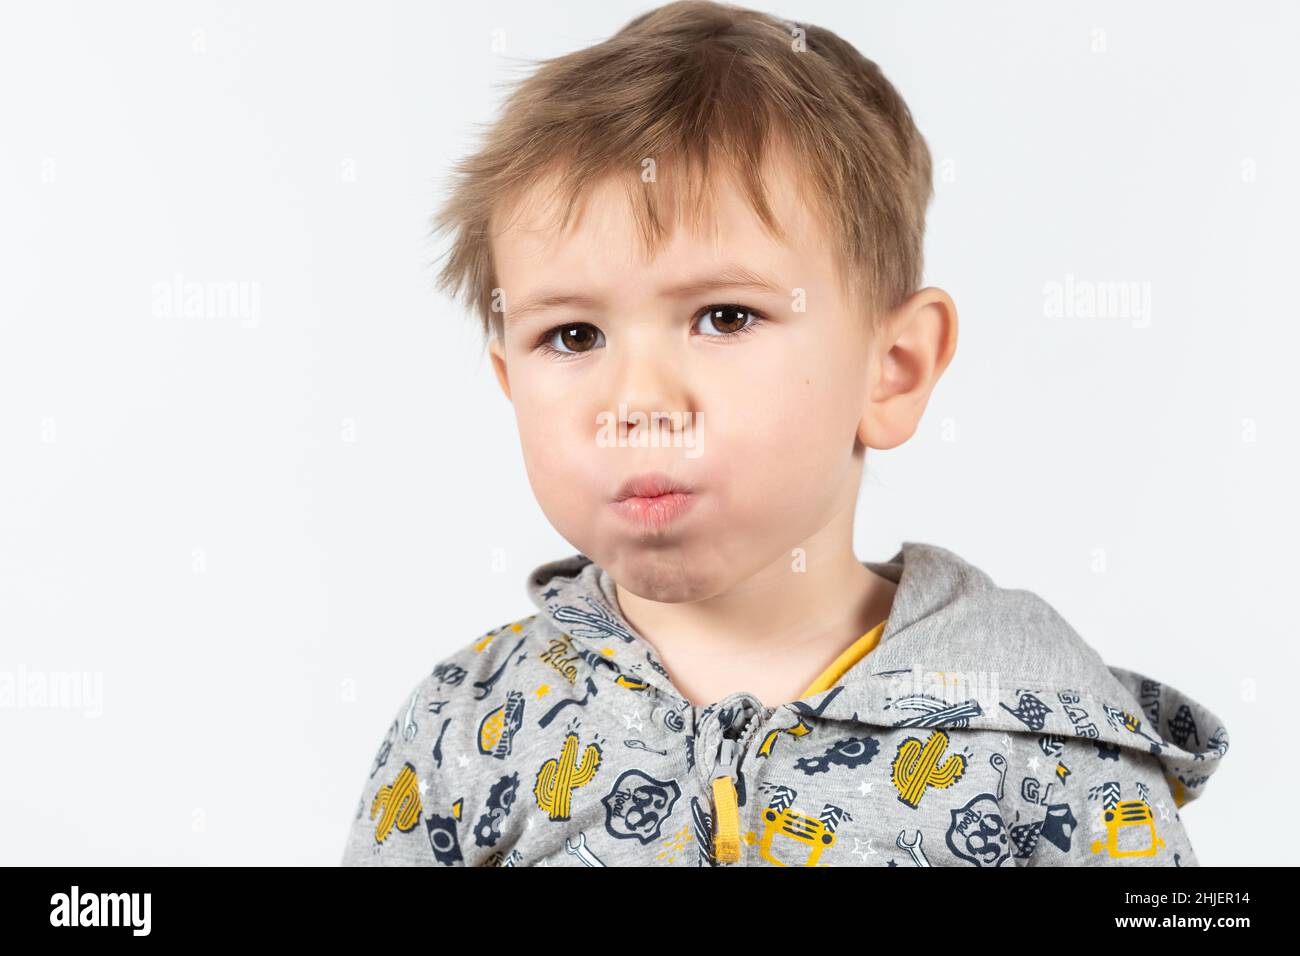 Cute caucasian boy shows myofunctional trainer. dental tariner is made to help equalize the growing teeth and correct bite, develop mouth breathing ha Stock Photo